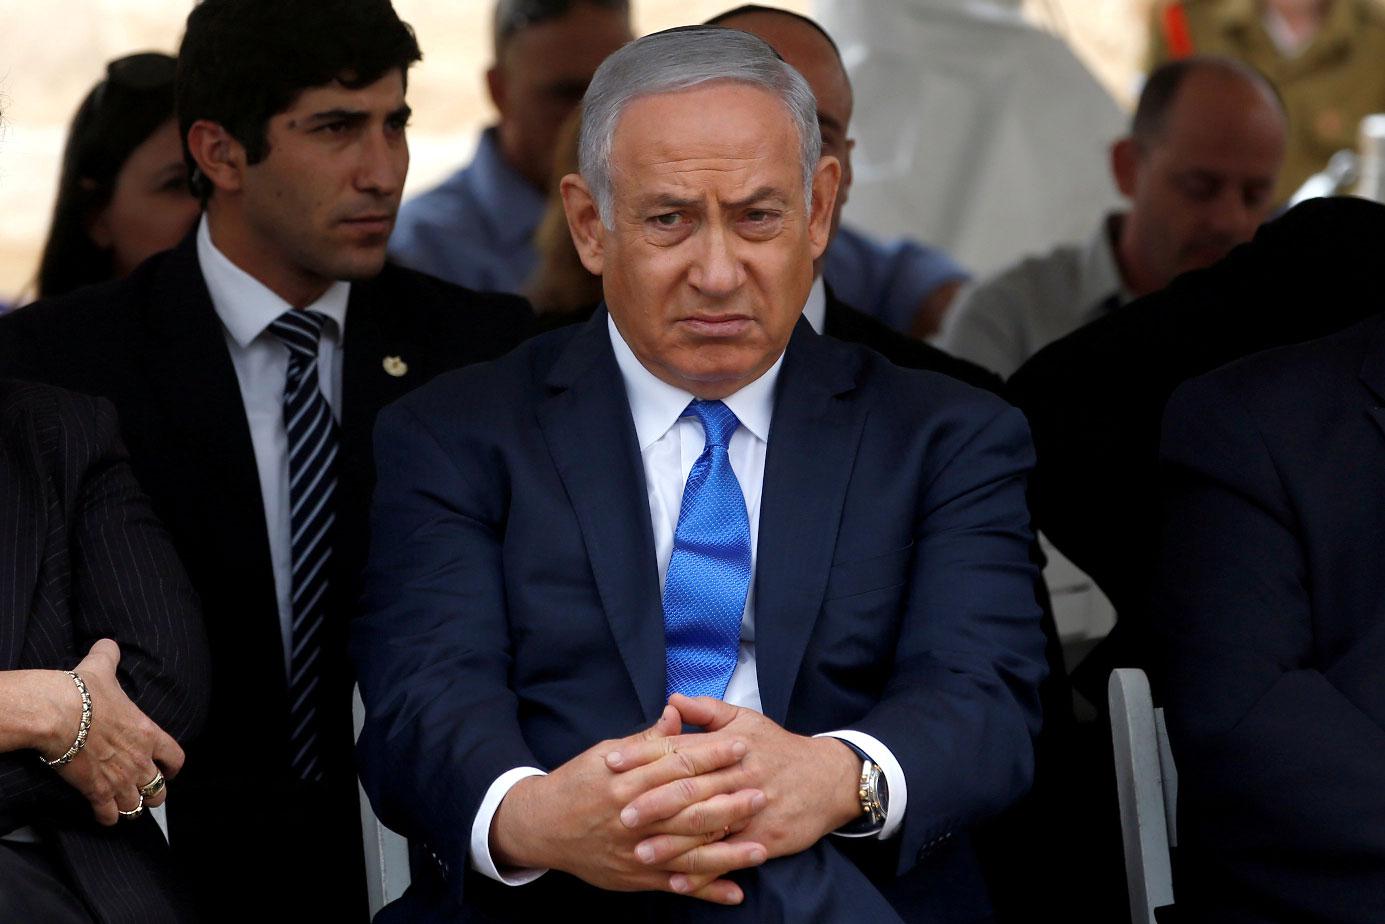 Netanyahu's political popularity is due to his reputation as Israel's "Mr. Security".